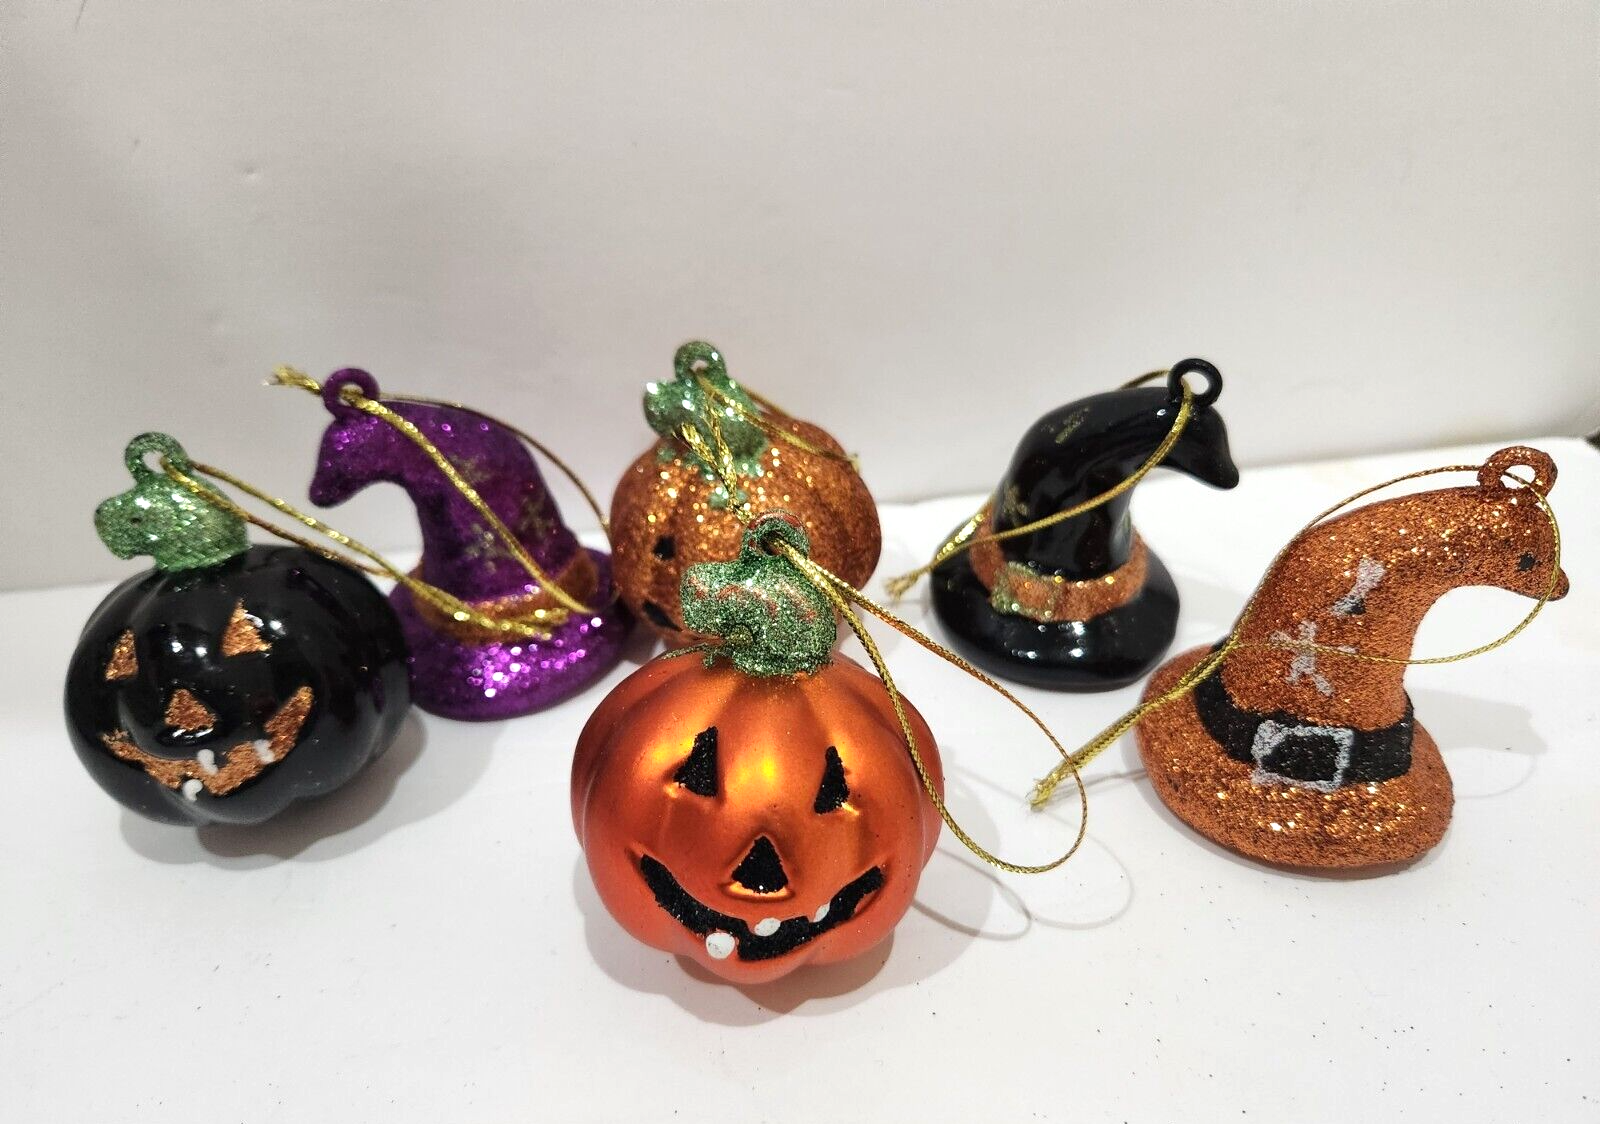 Primary image for Halloween Pumpkins Witch Hats Plastic Ornaments Decorations Set of 6